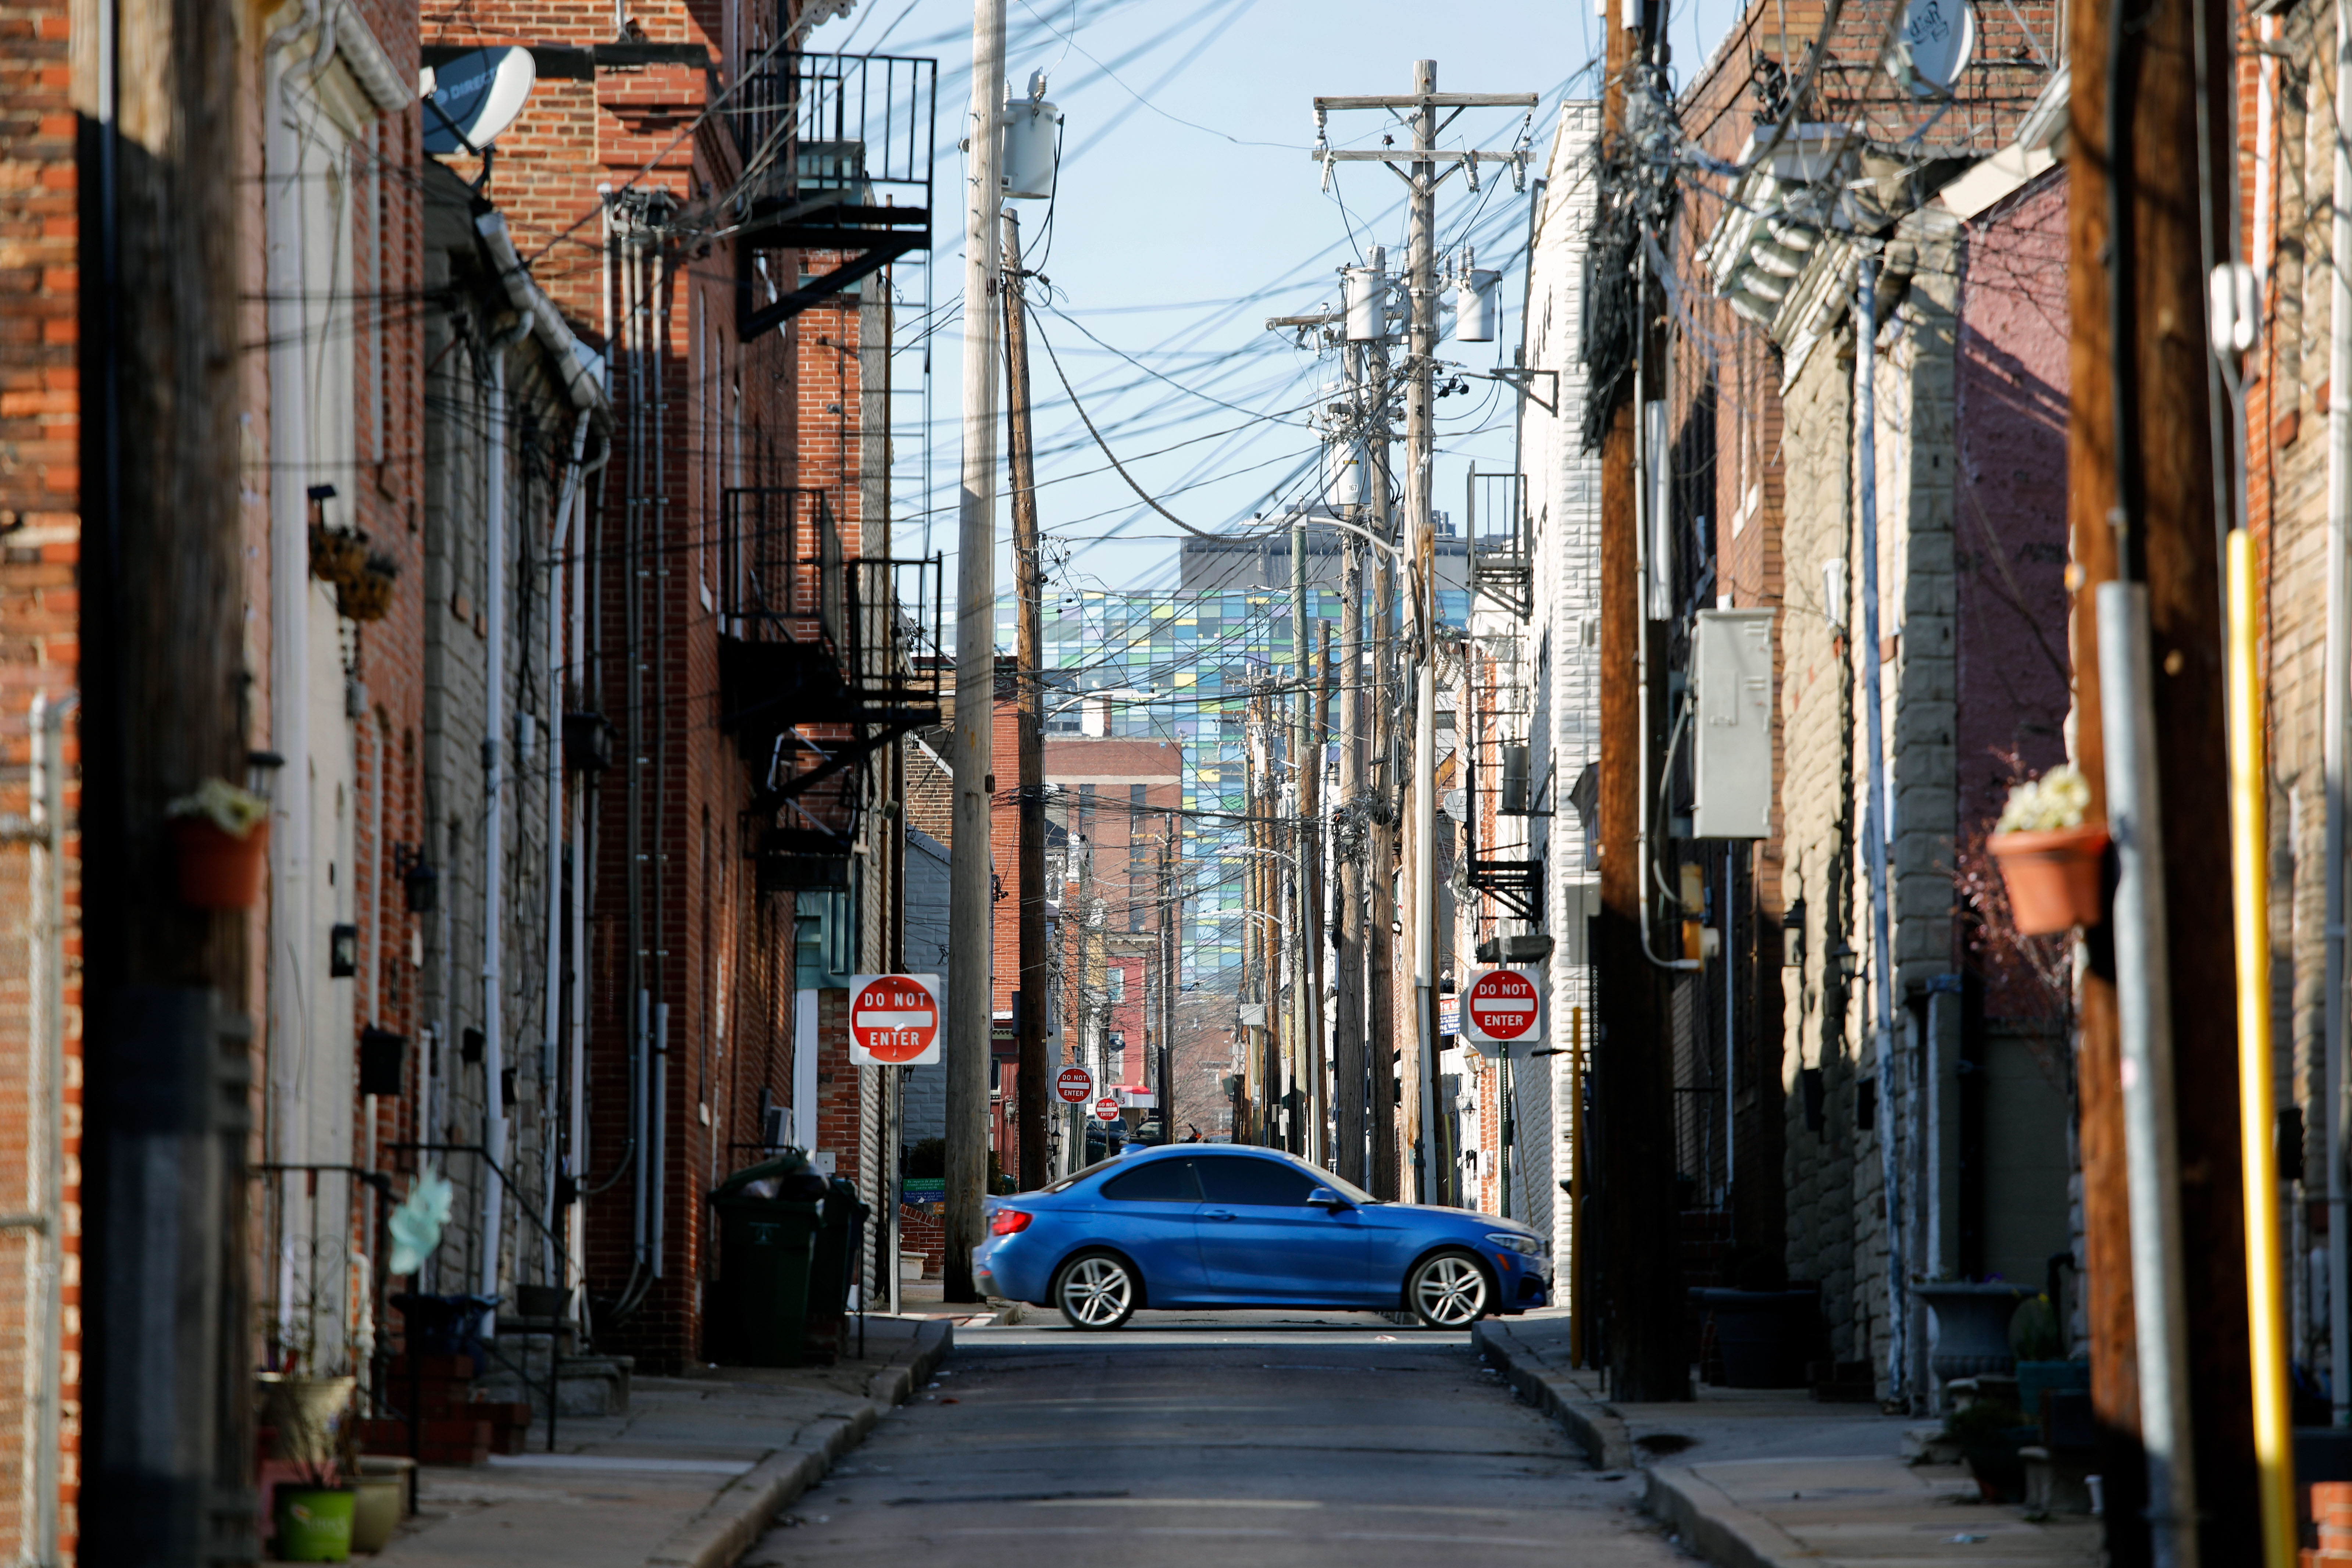 A car drives down a street in Baltimore, MD on March 26, 2018. (Photo by David GANNON /Getty Images)